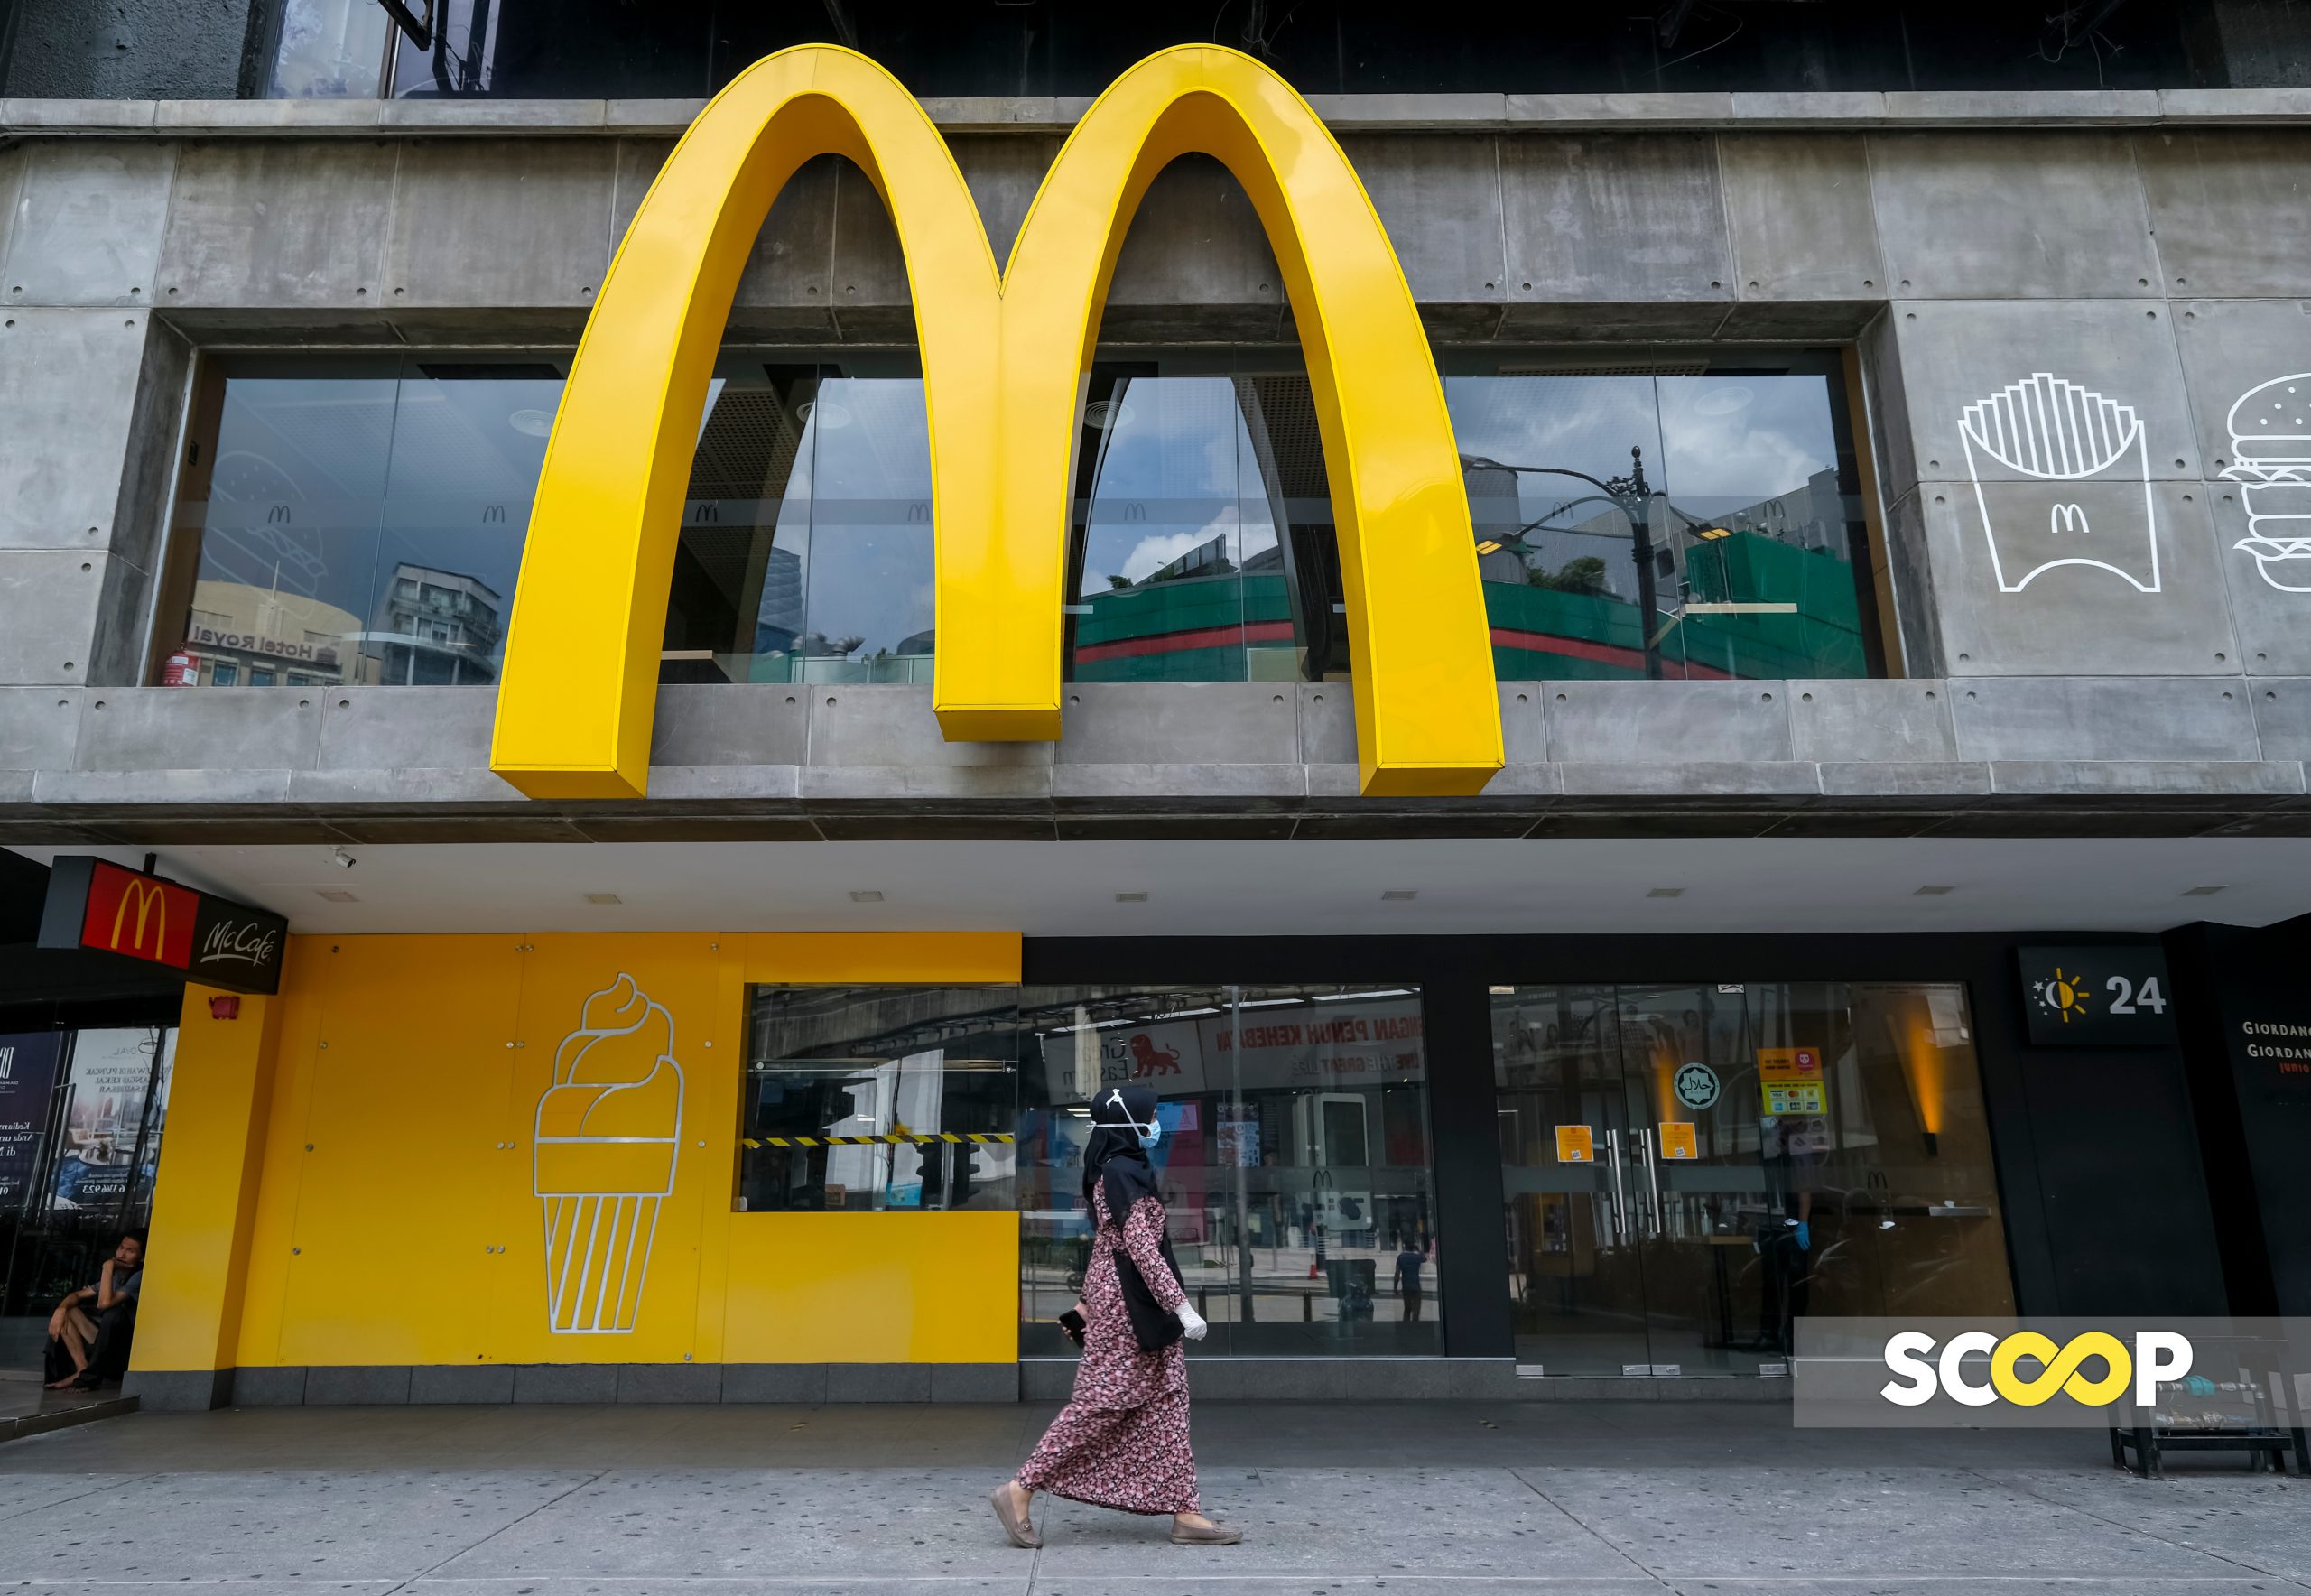 Boycotts must be based on facts: McDonald’s confirms suit against BDS M’sia